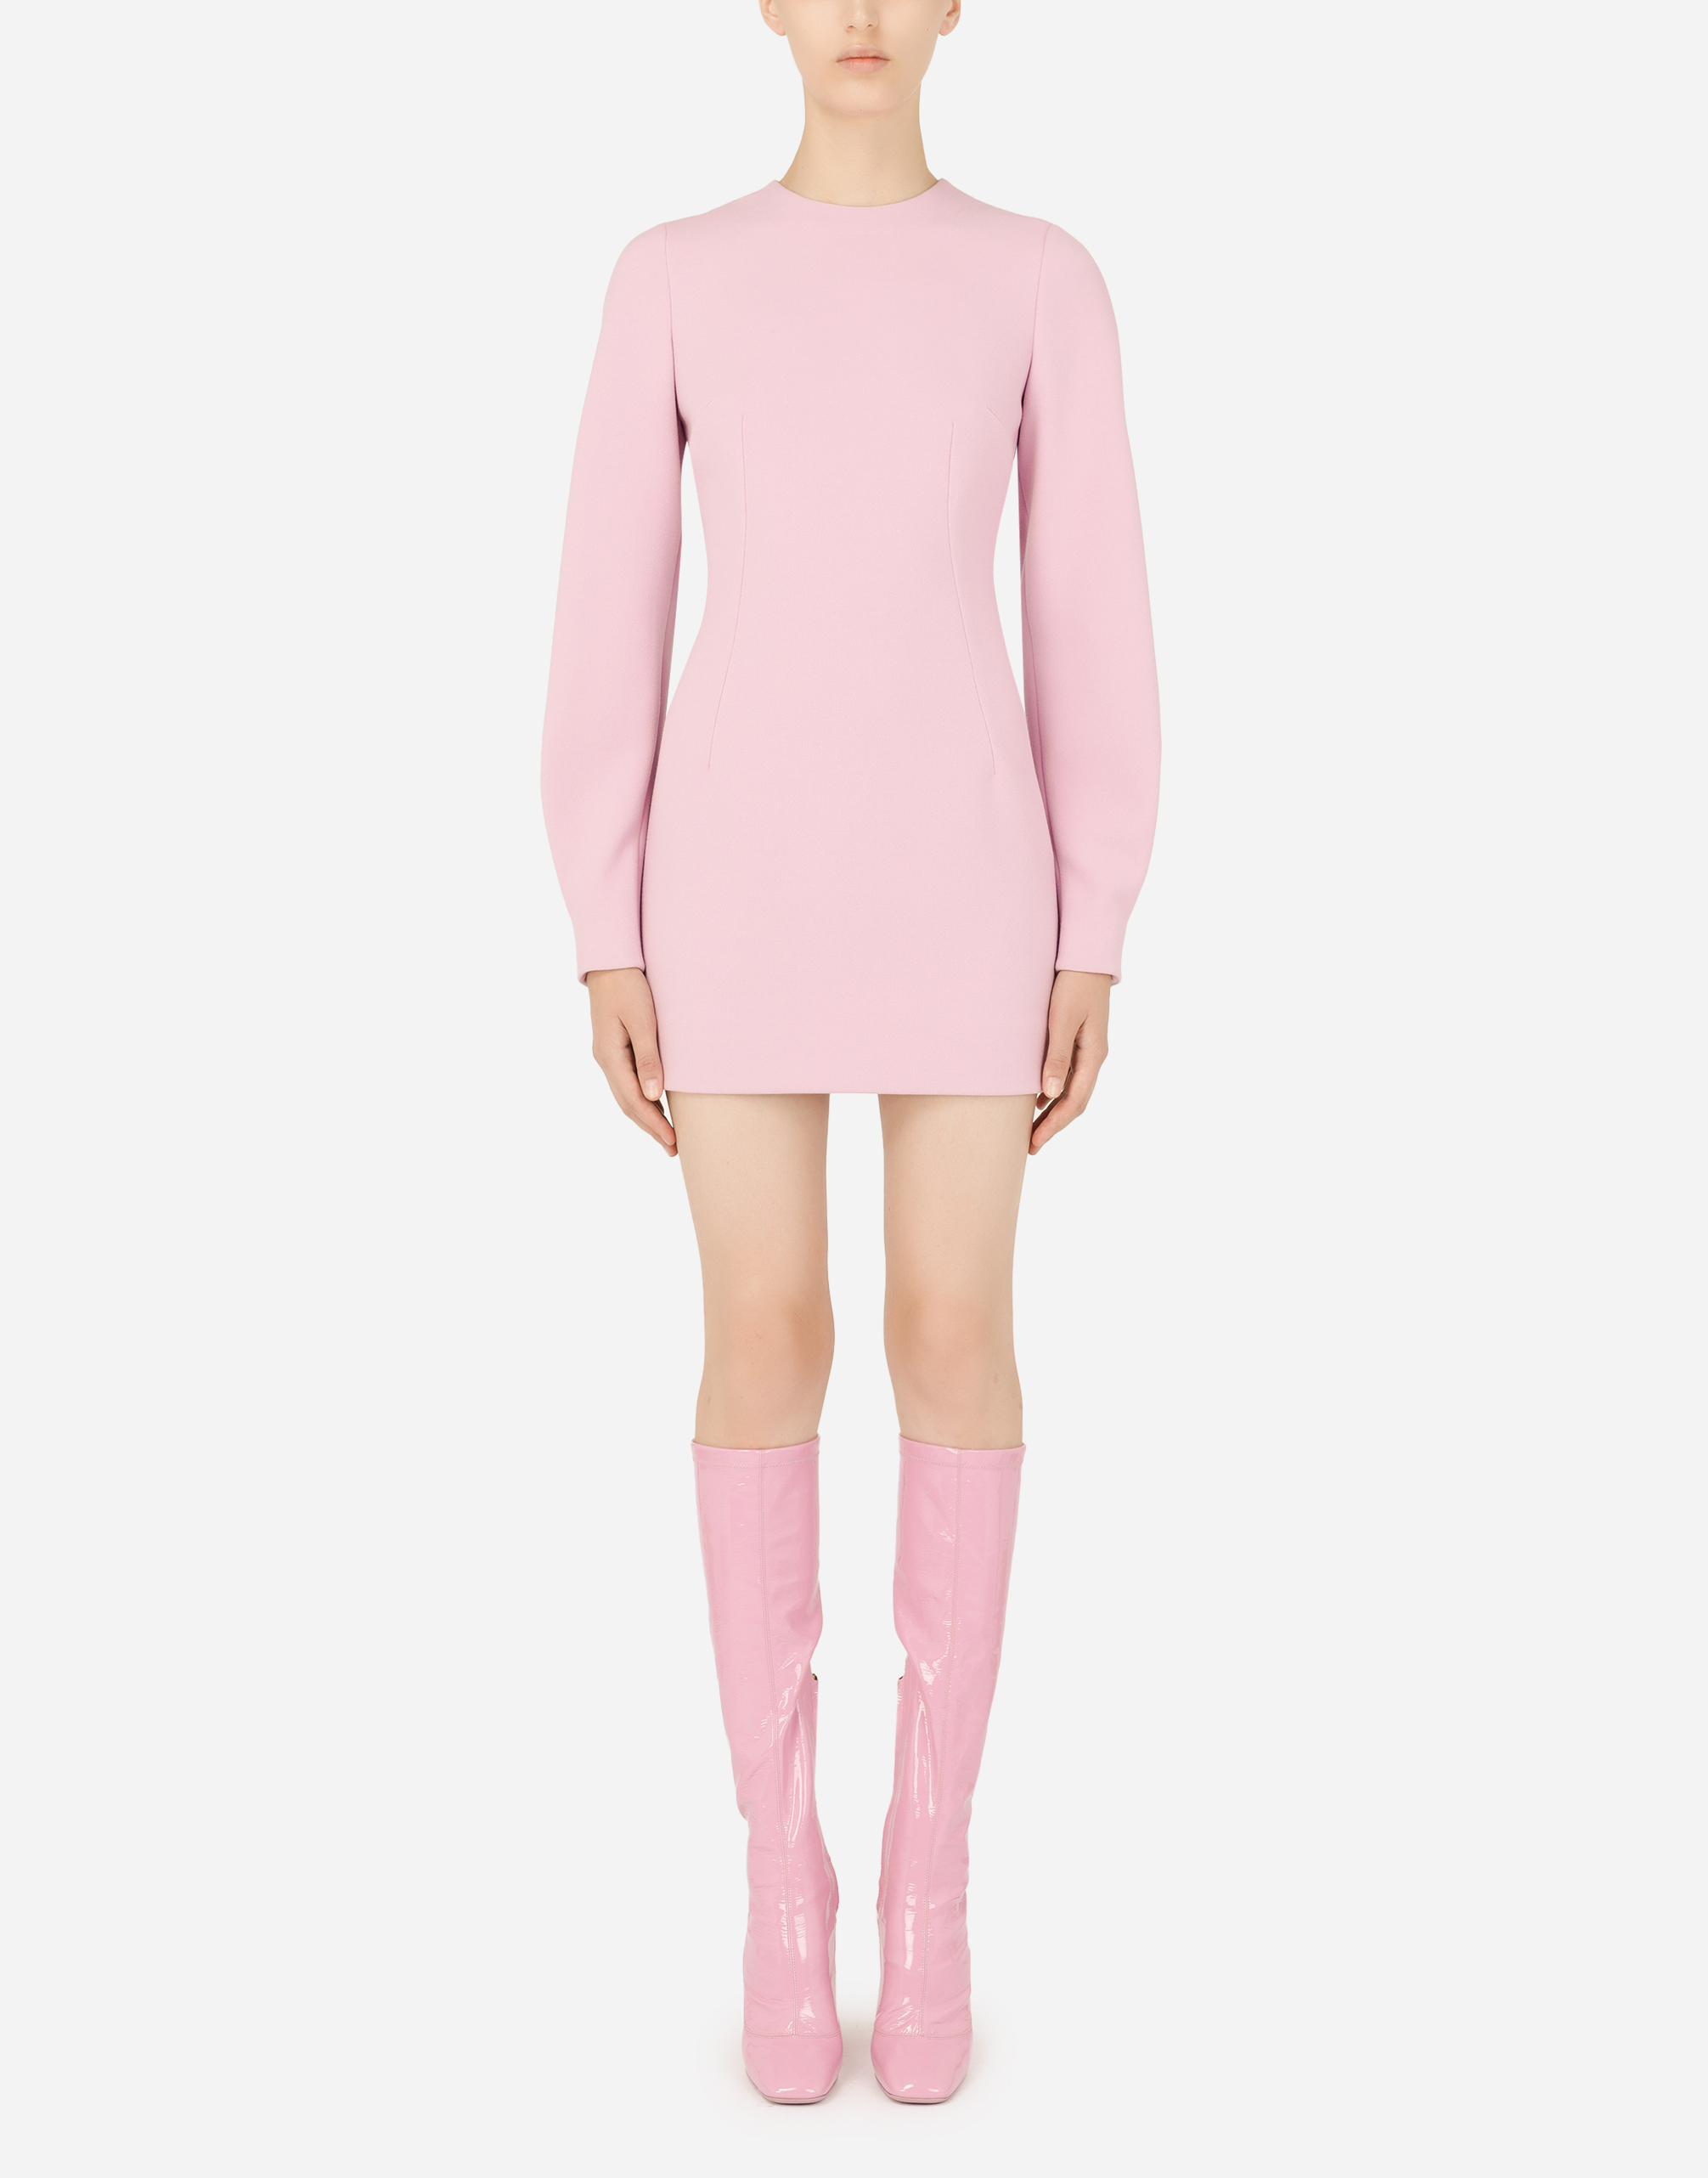 Short sable dress in Pink